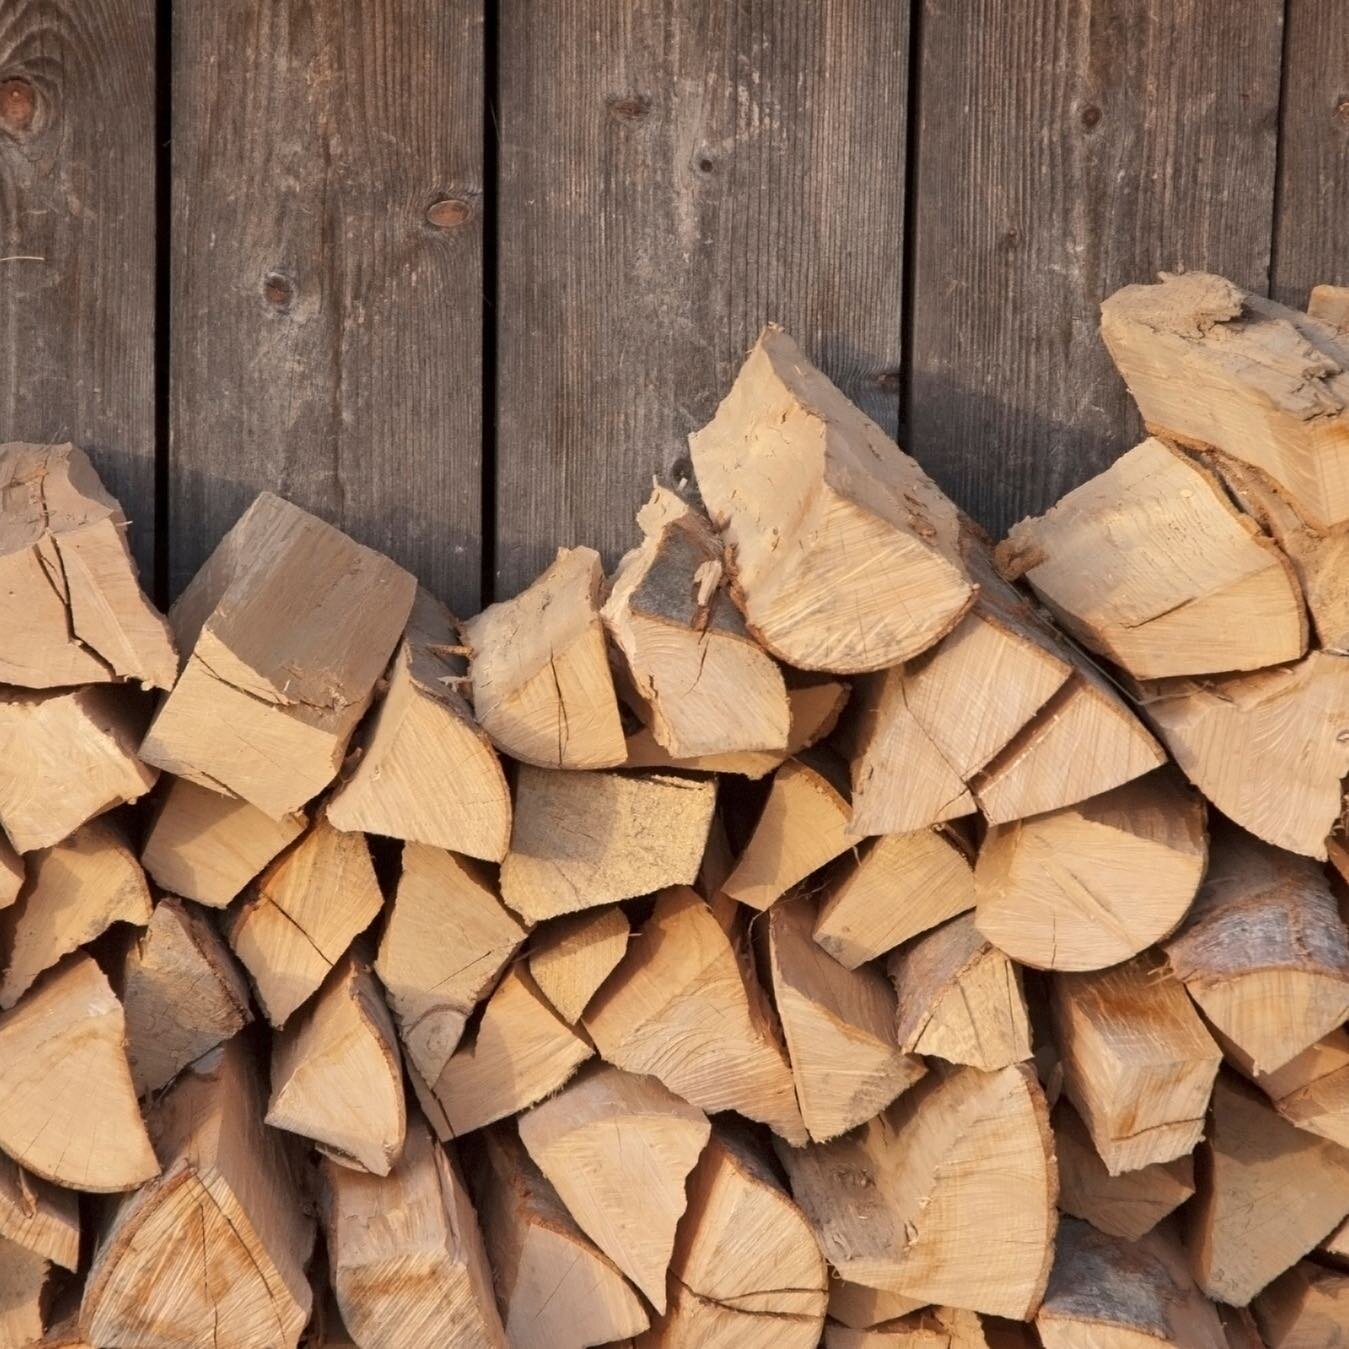 Did you know Landscape Systems also carries firewood 🪵? We carry mesquite, pecan, oak, and pinon fire wood. 🔥